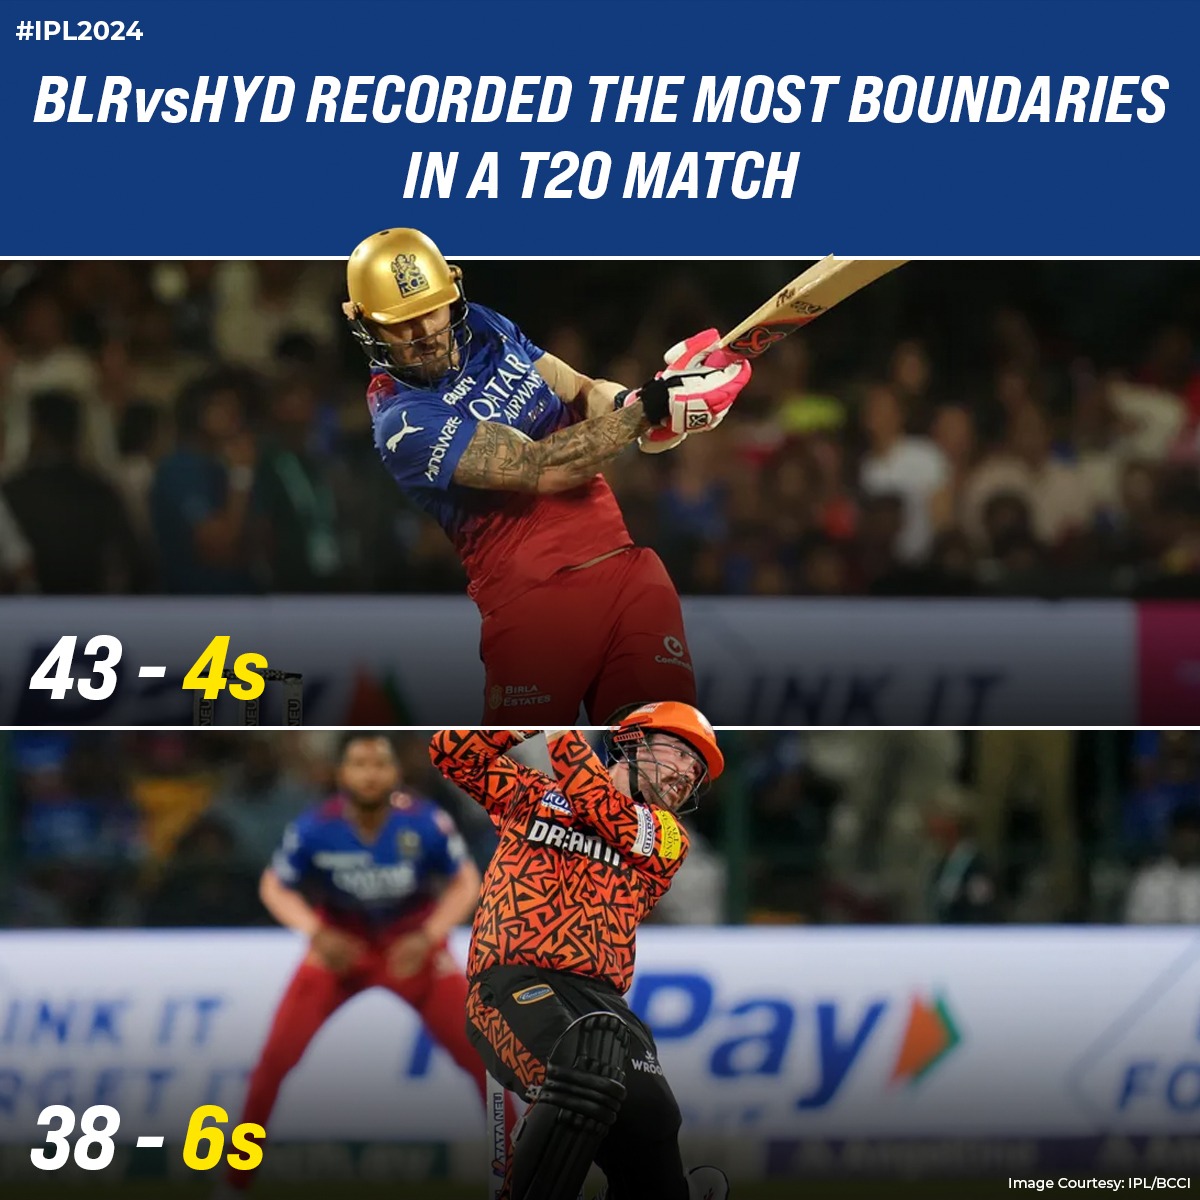 The M. Chinnaswamy Stadium witnessed a boundary galore with 81 boundaries scored by both teams. Will this record be broken? #RCBvSRH #IPL #IPL2024